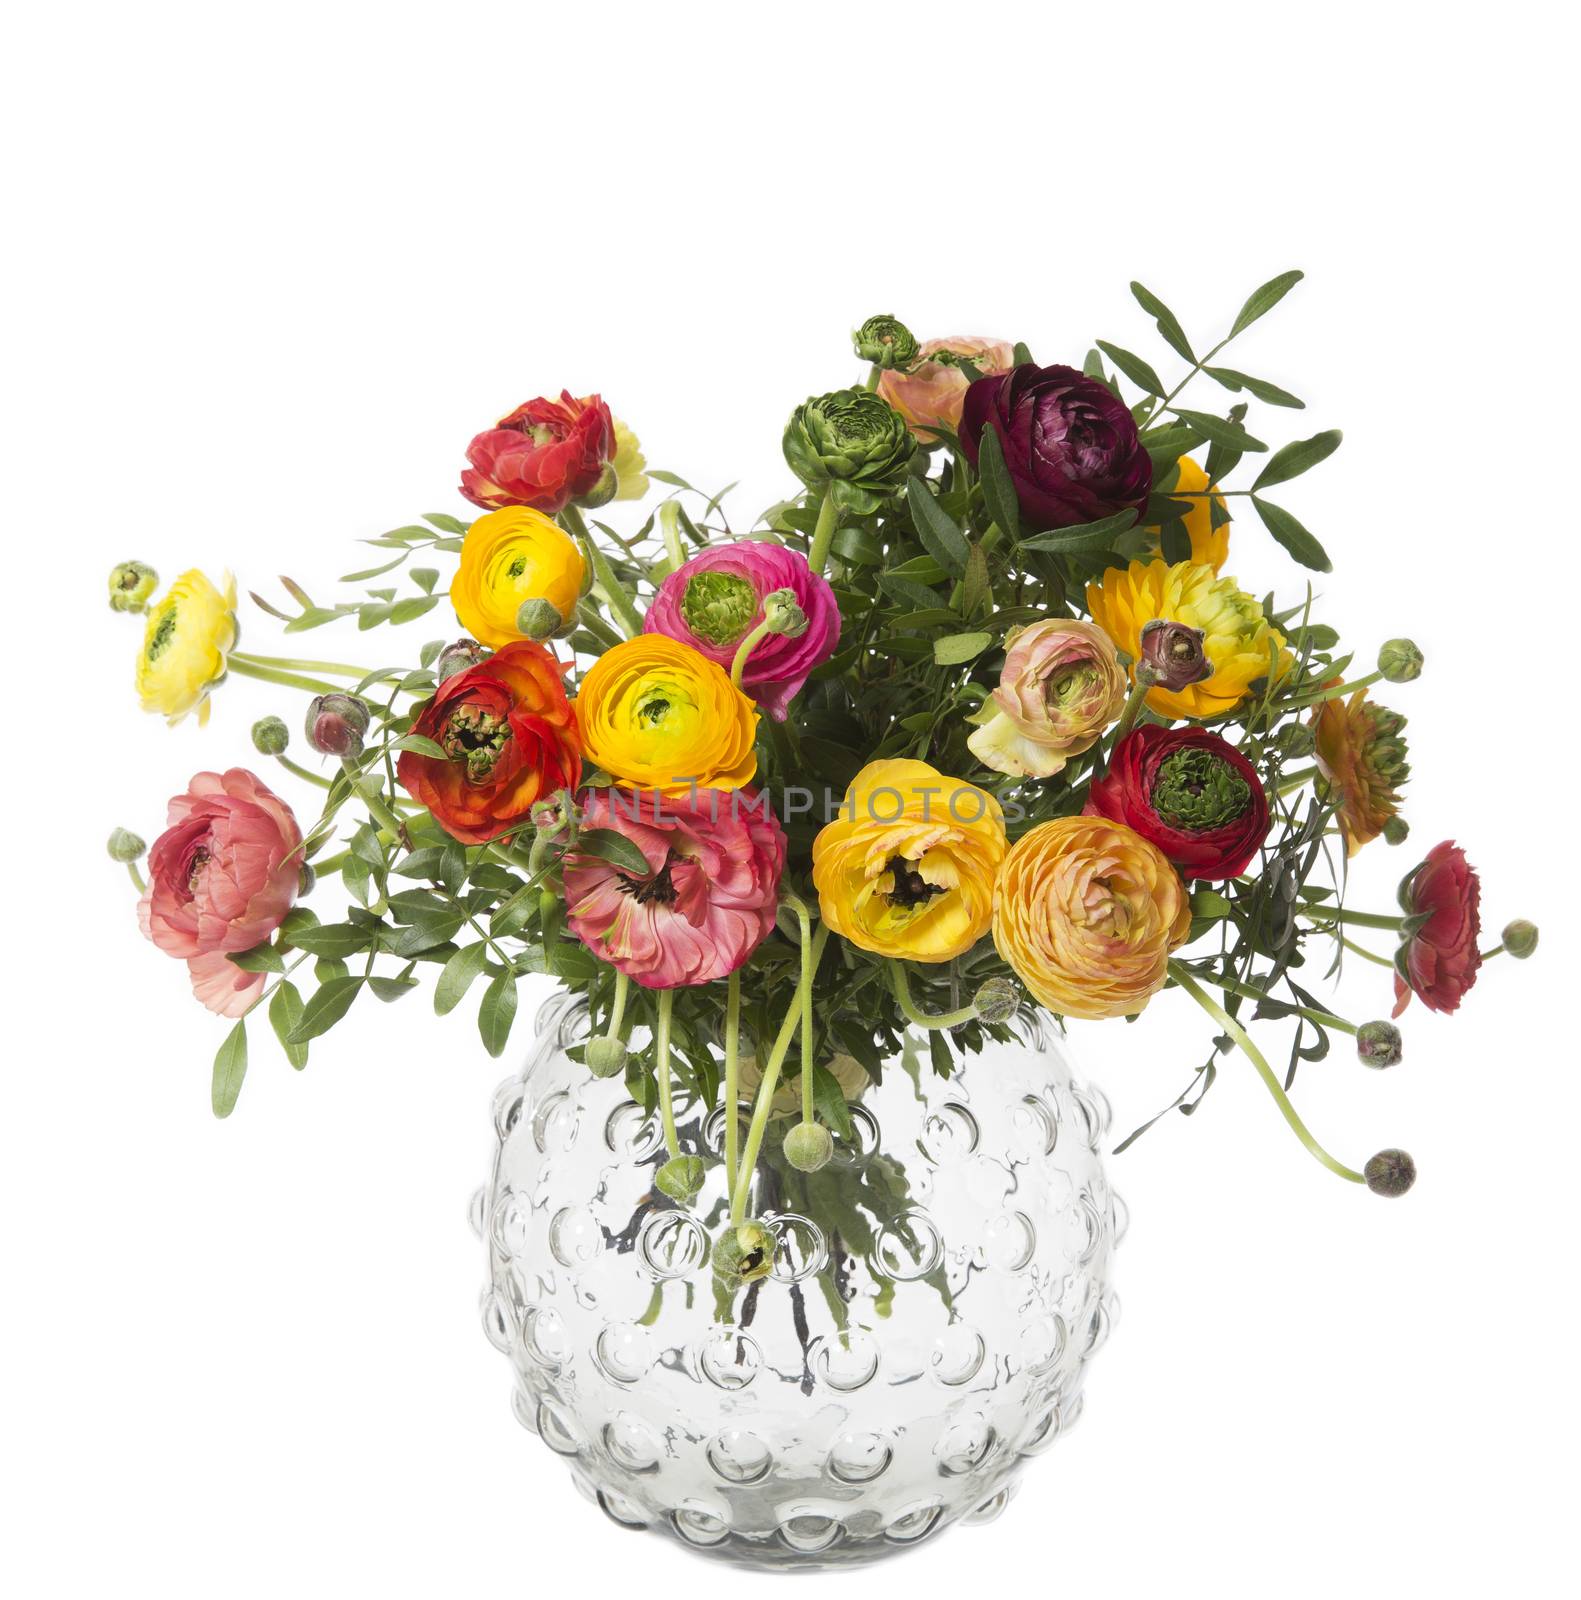 Bouquet of flowers in a glass jar isolated on white